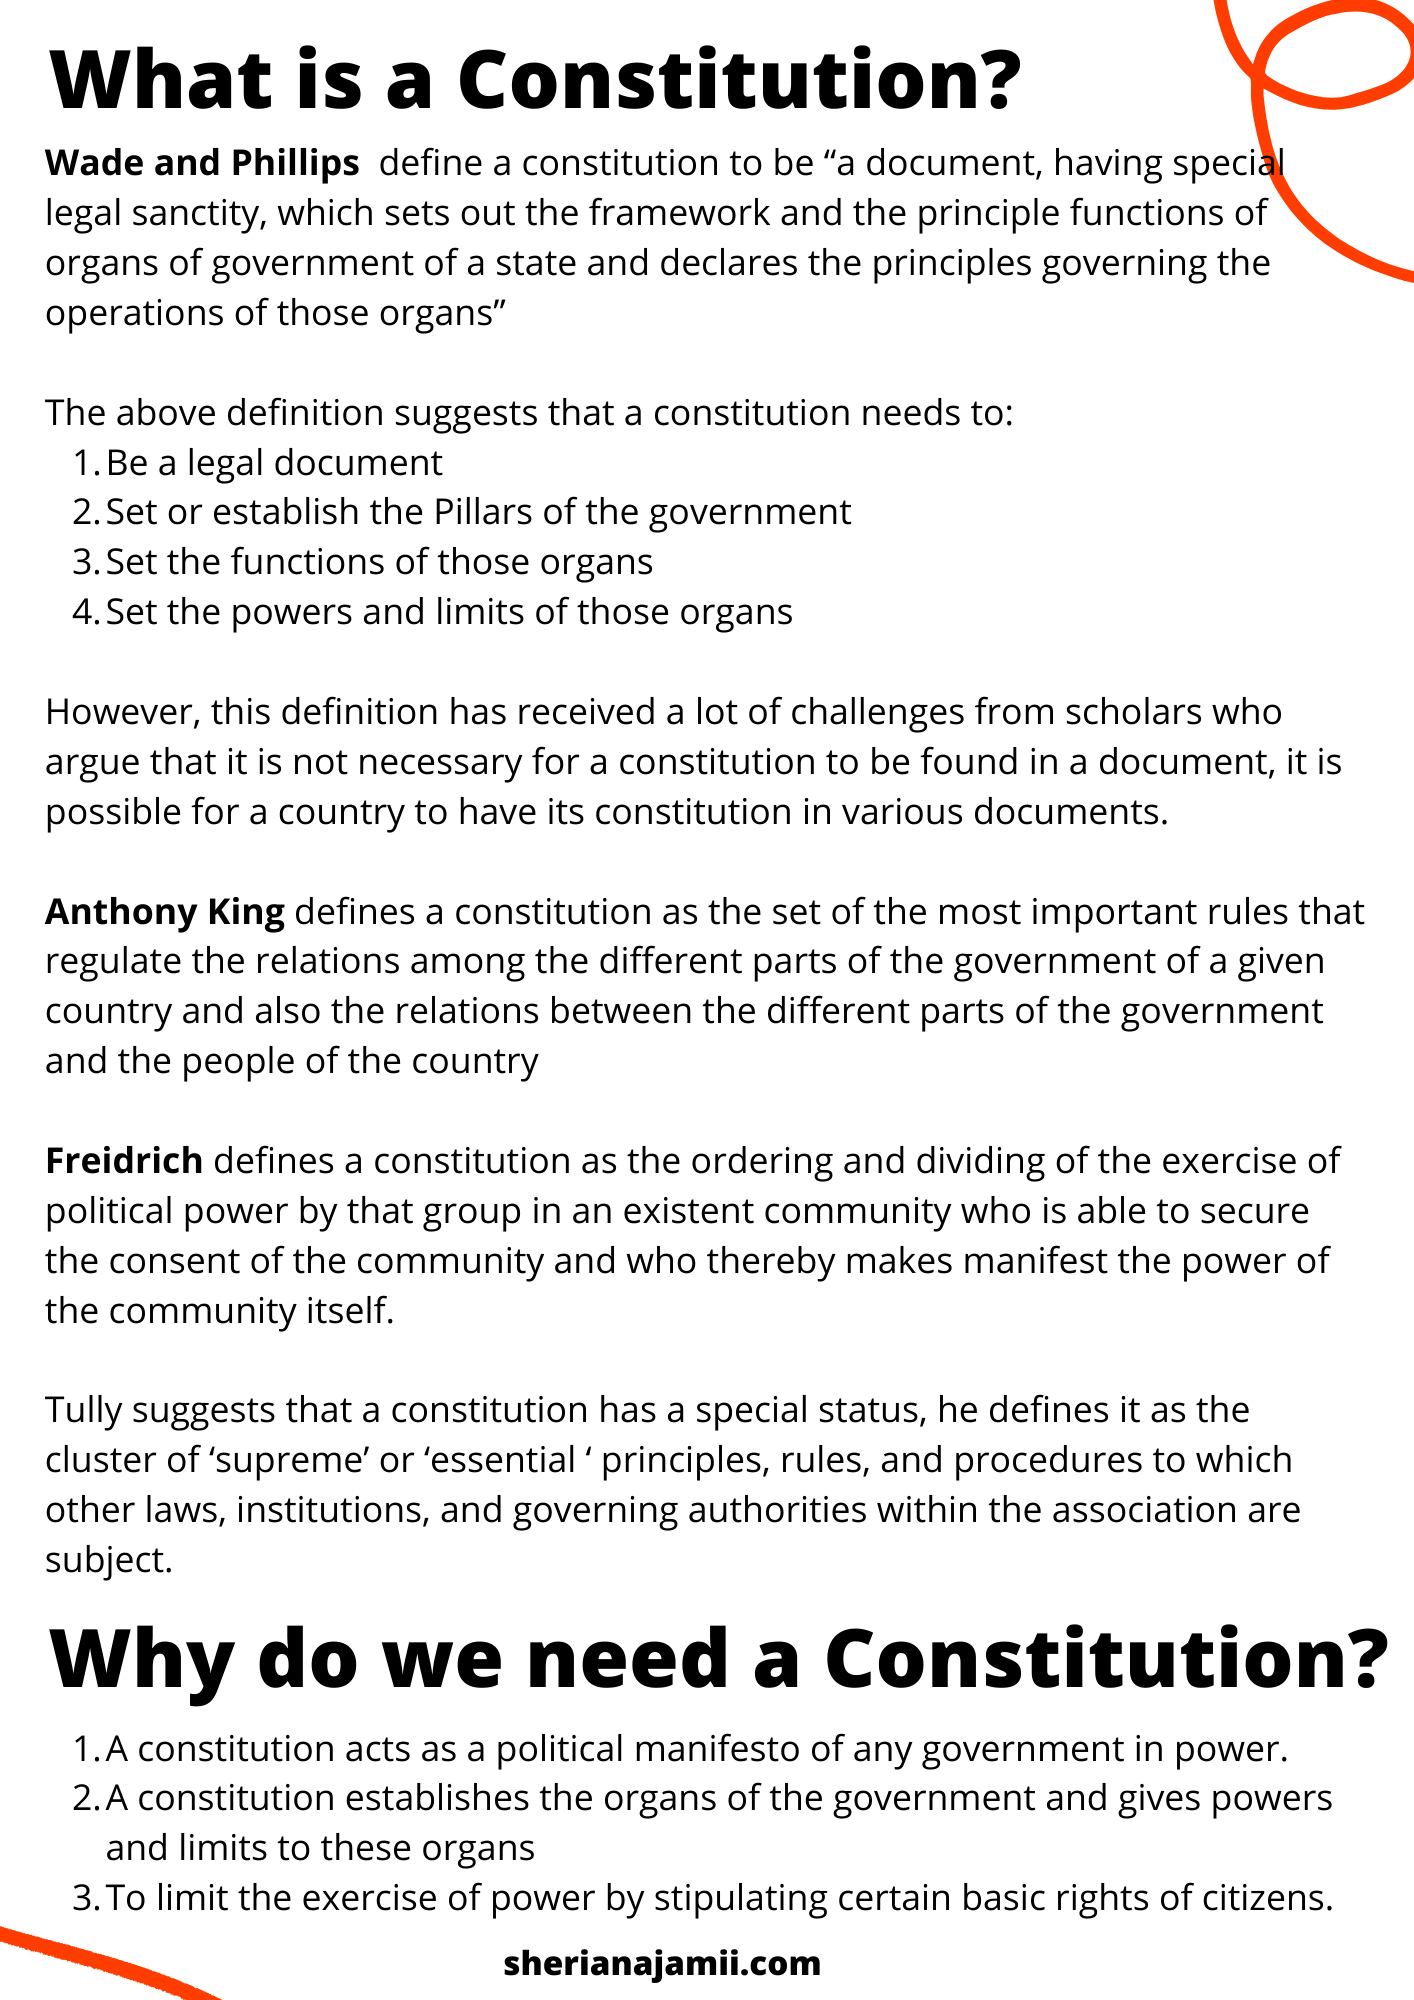 what is constitution? why do we need constitution?